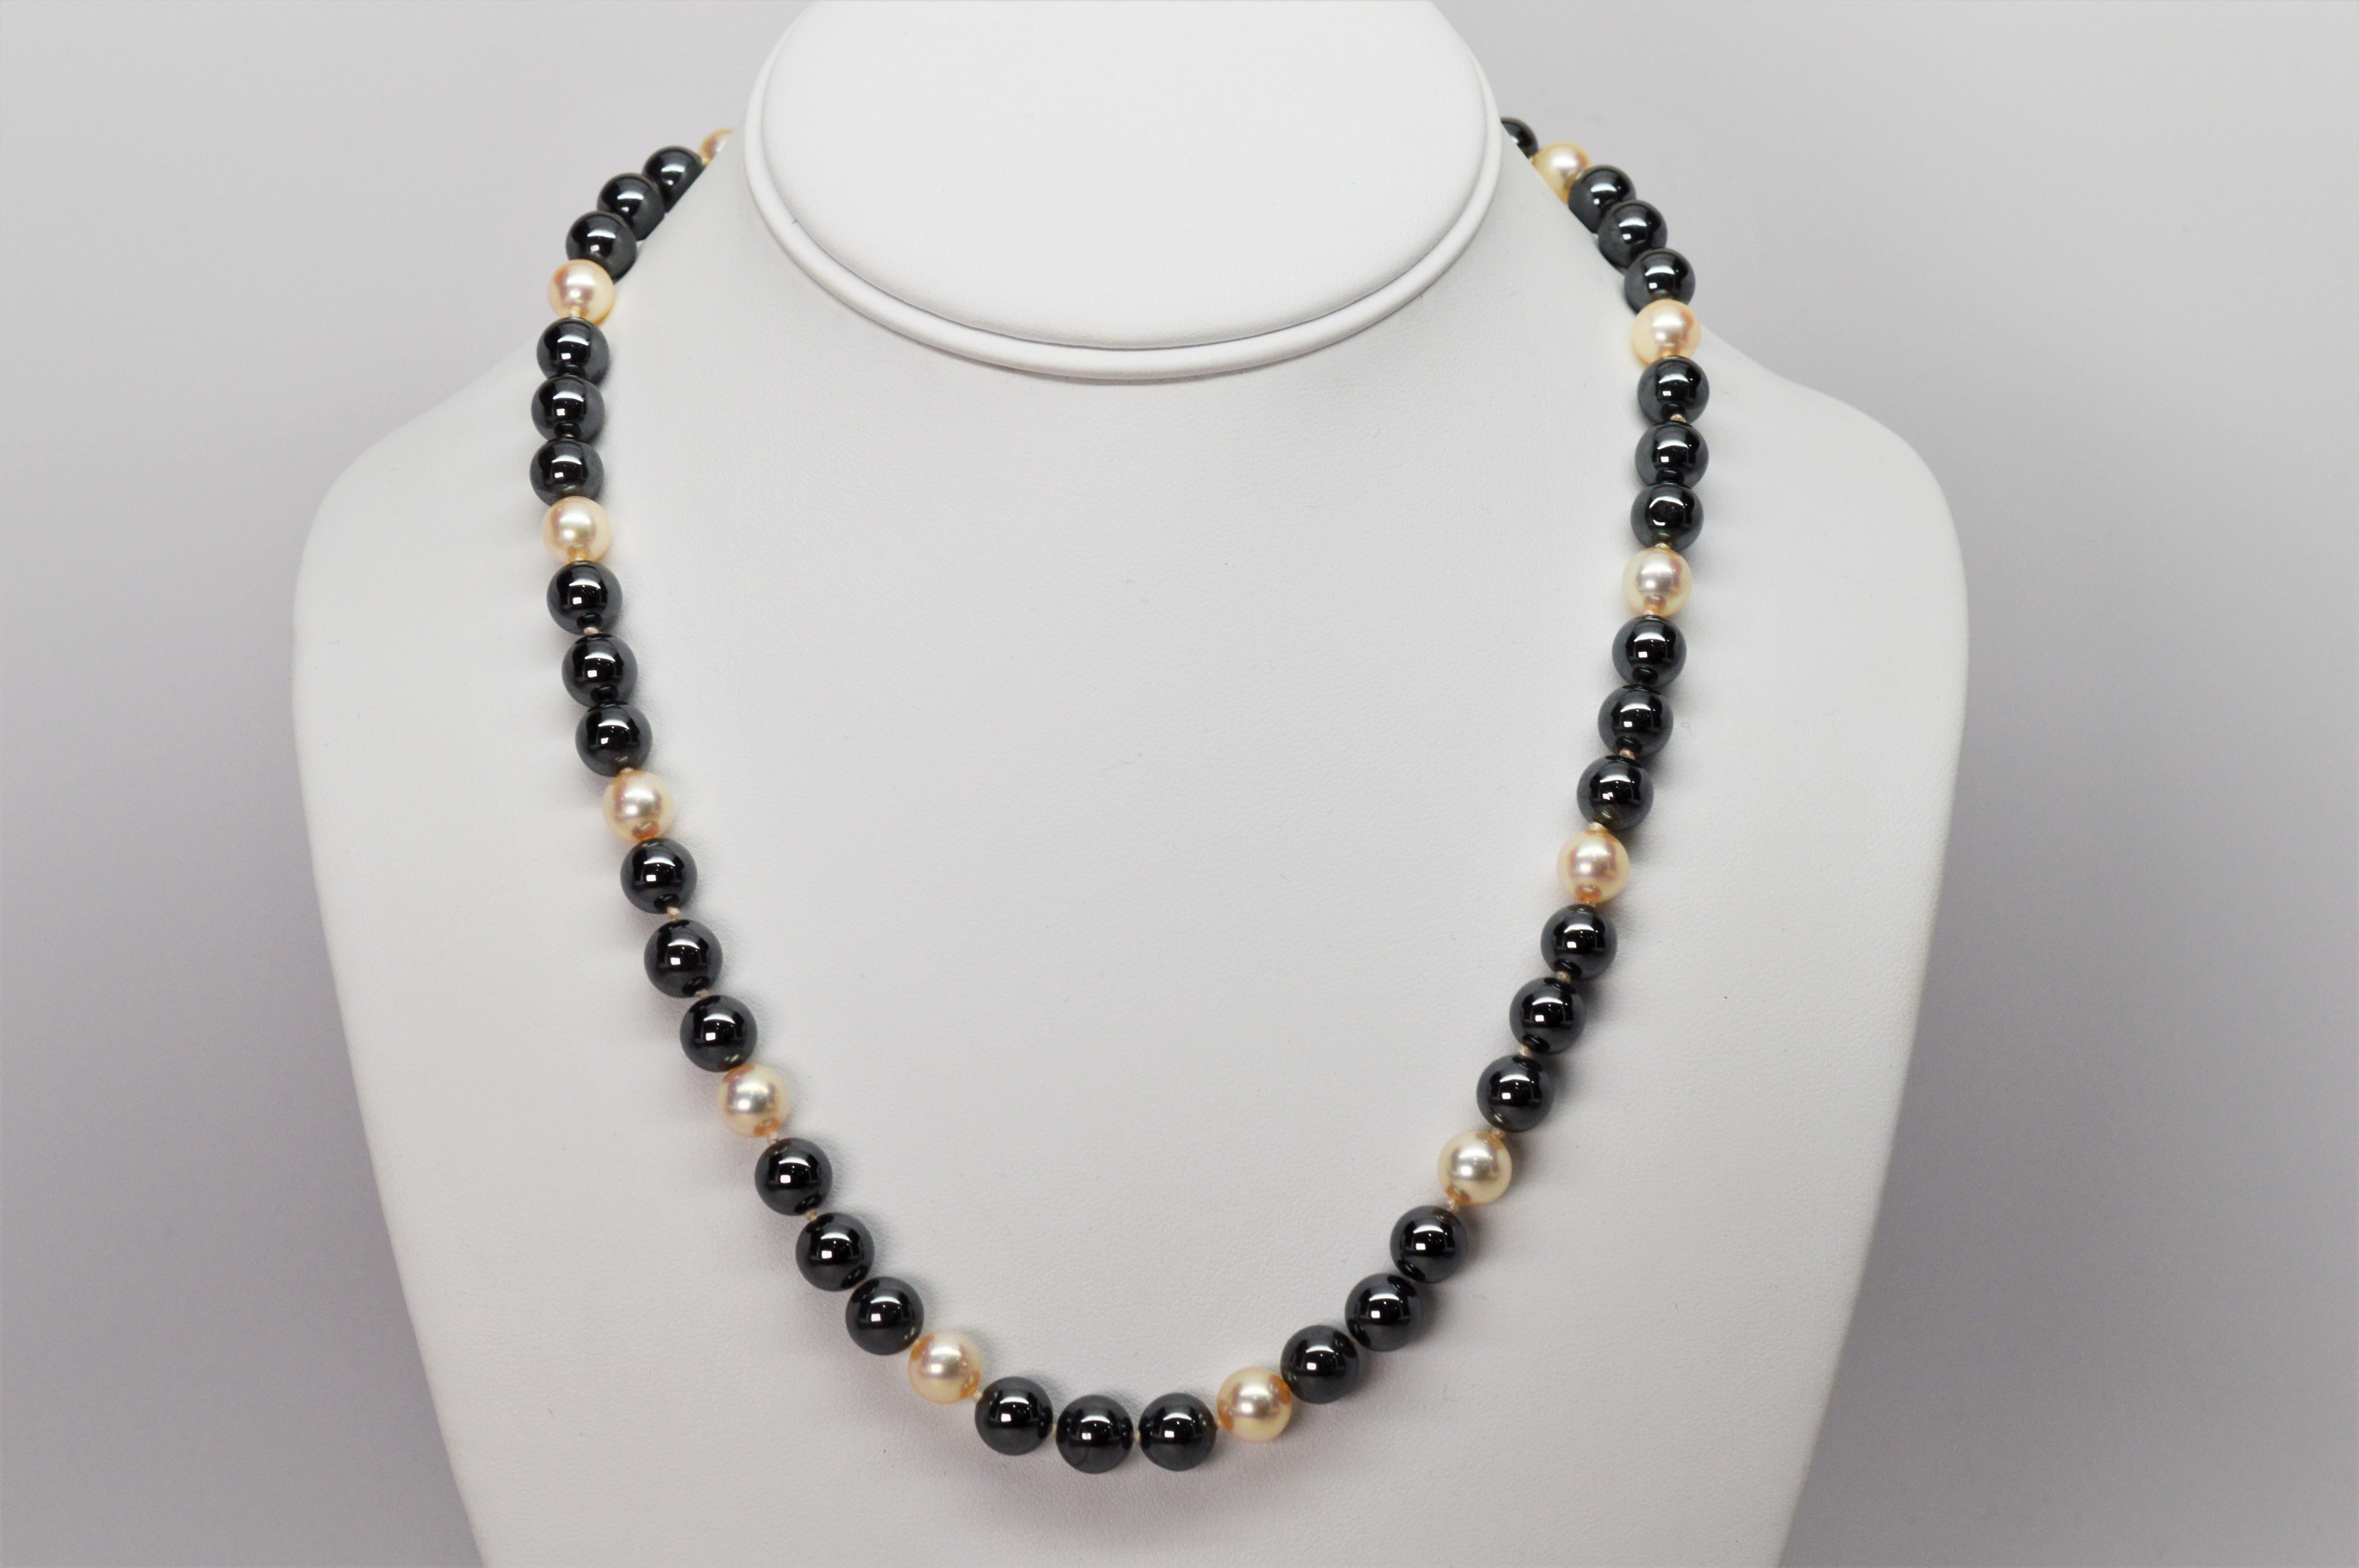 Pretty blush color round 8.5 mm AAA Akoya Pearls enhance the reflective slate gray Hematite beads that create this eighteen inch strand. Said to absorb negative energy and be calming, the hematite round stone beads measure 8mm. The necklace is